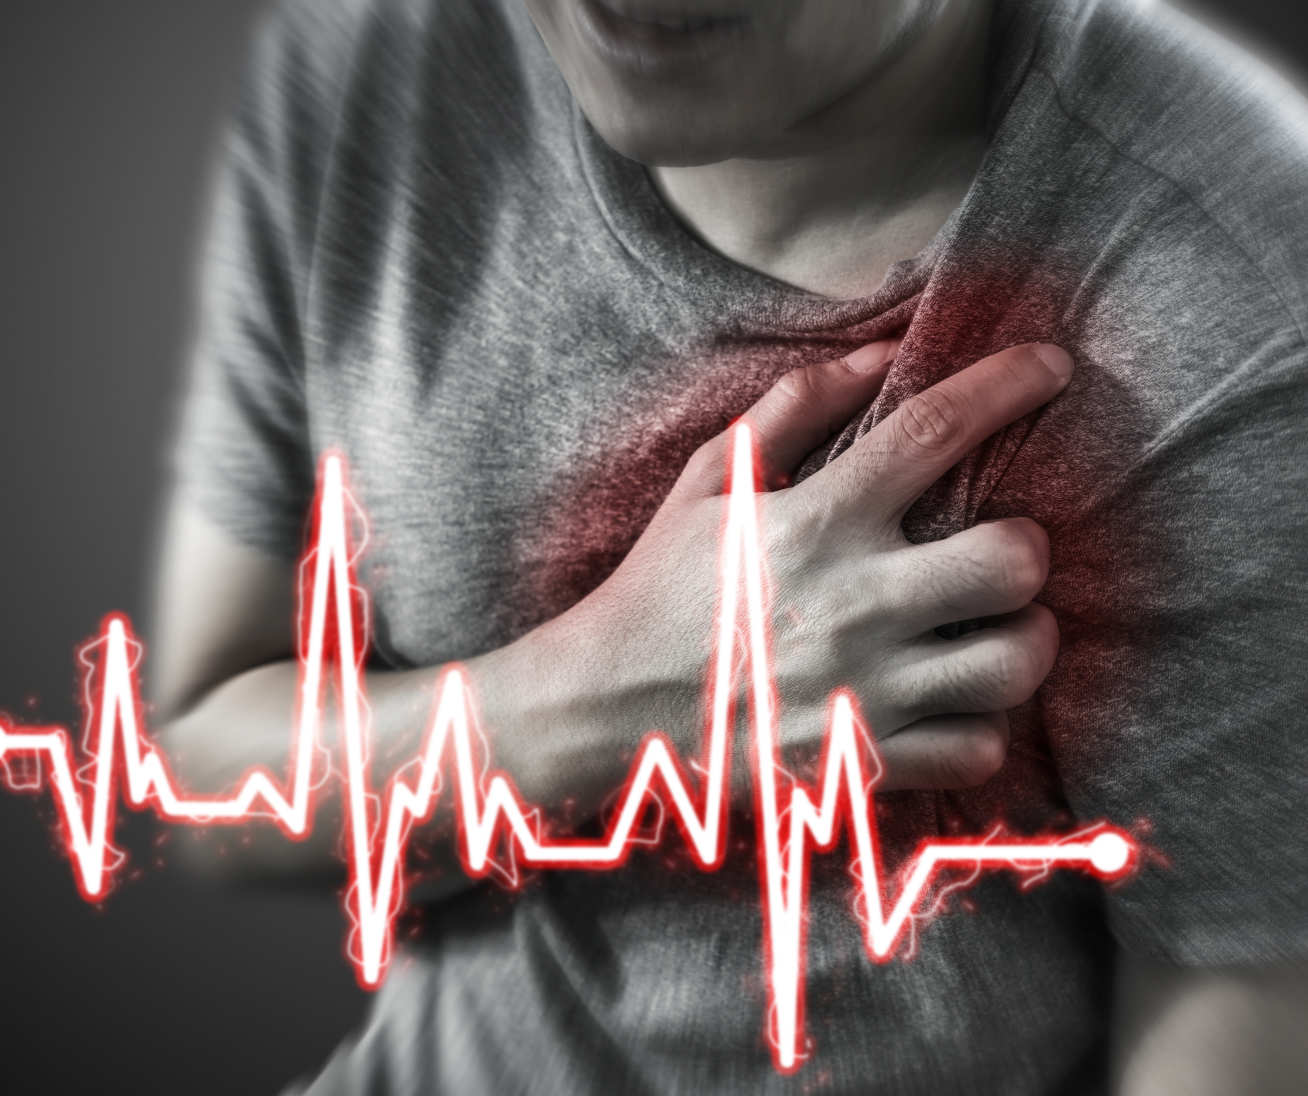 Heart attacks occur when blood supply becomes blocked with fatty substances